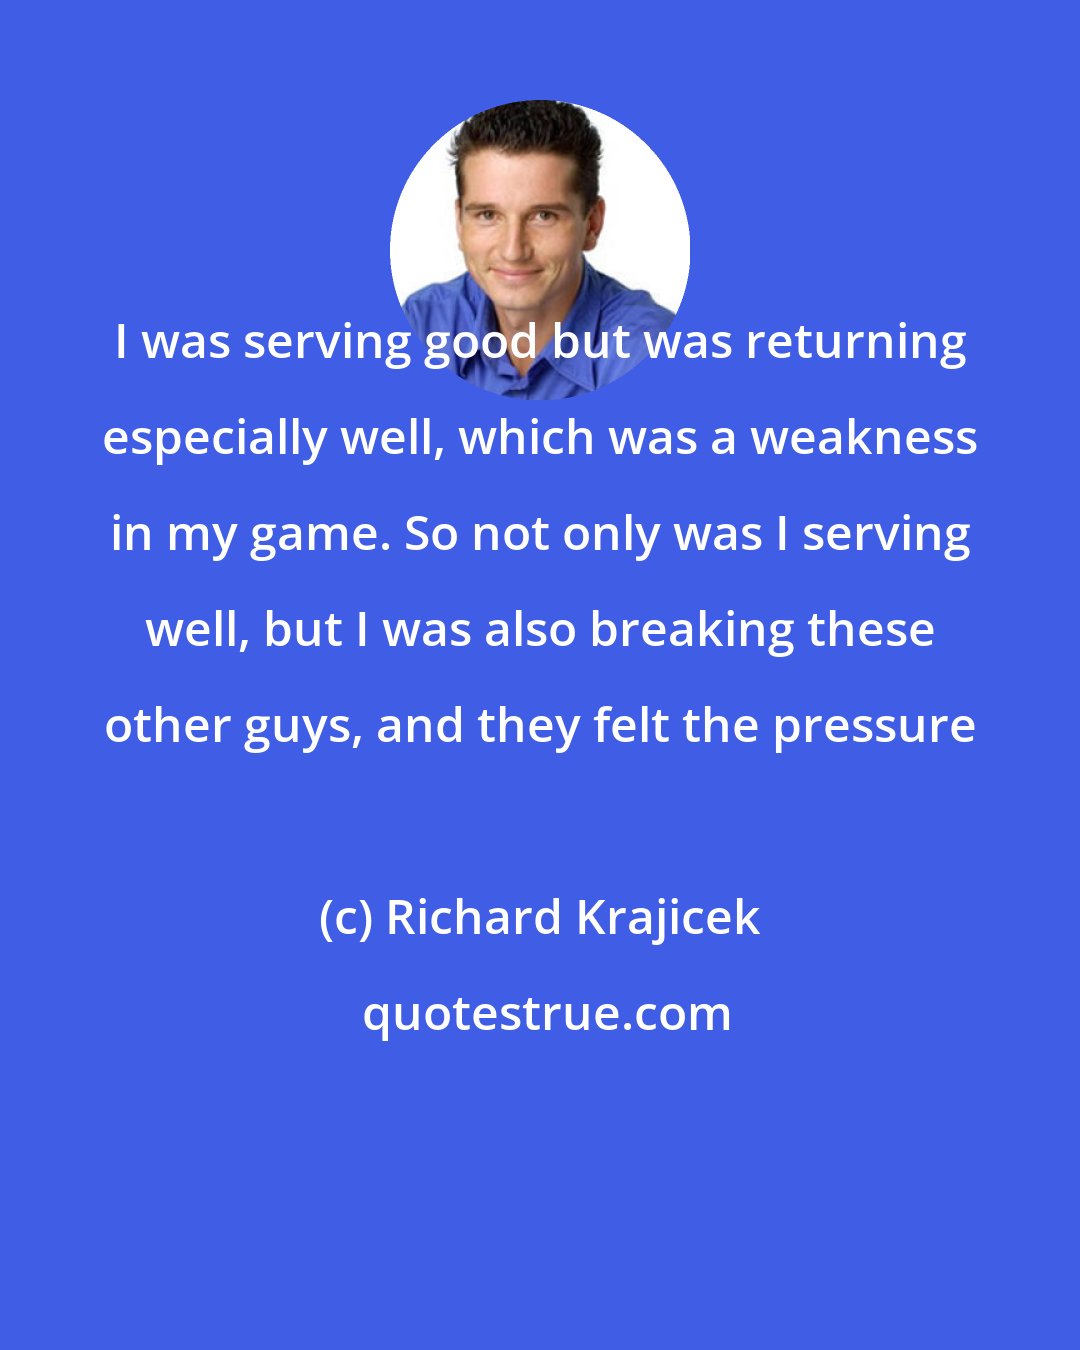 Richard Krajicek: I was serving good but was returning especially well, which was a weakness in my game. So not only was I serving well, but I was also breaking these other guys, and they felt the pressure